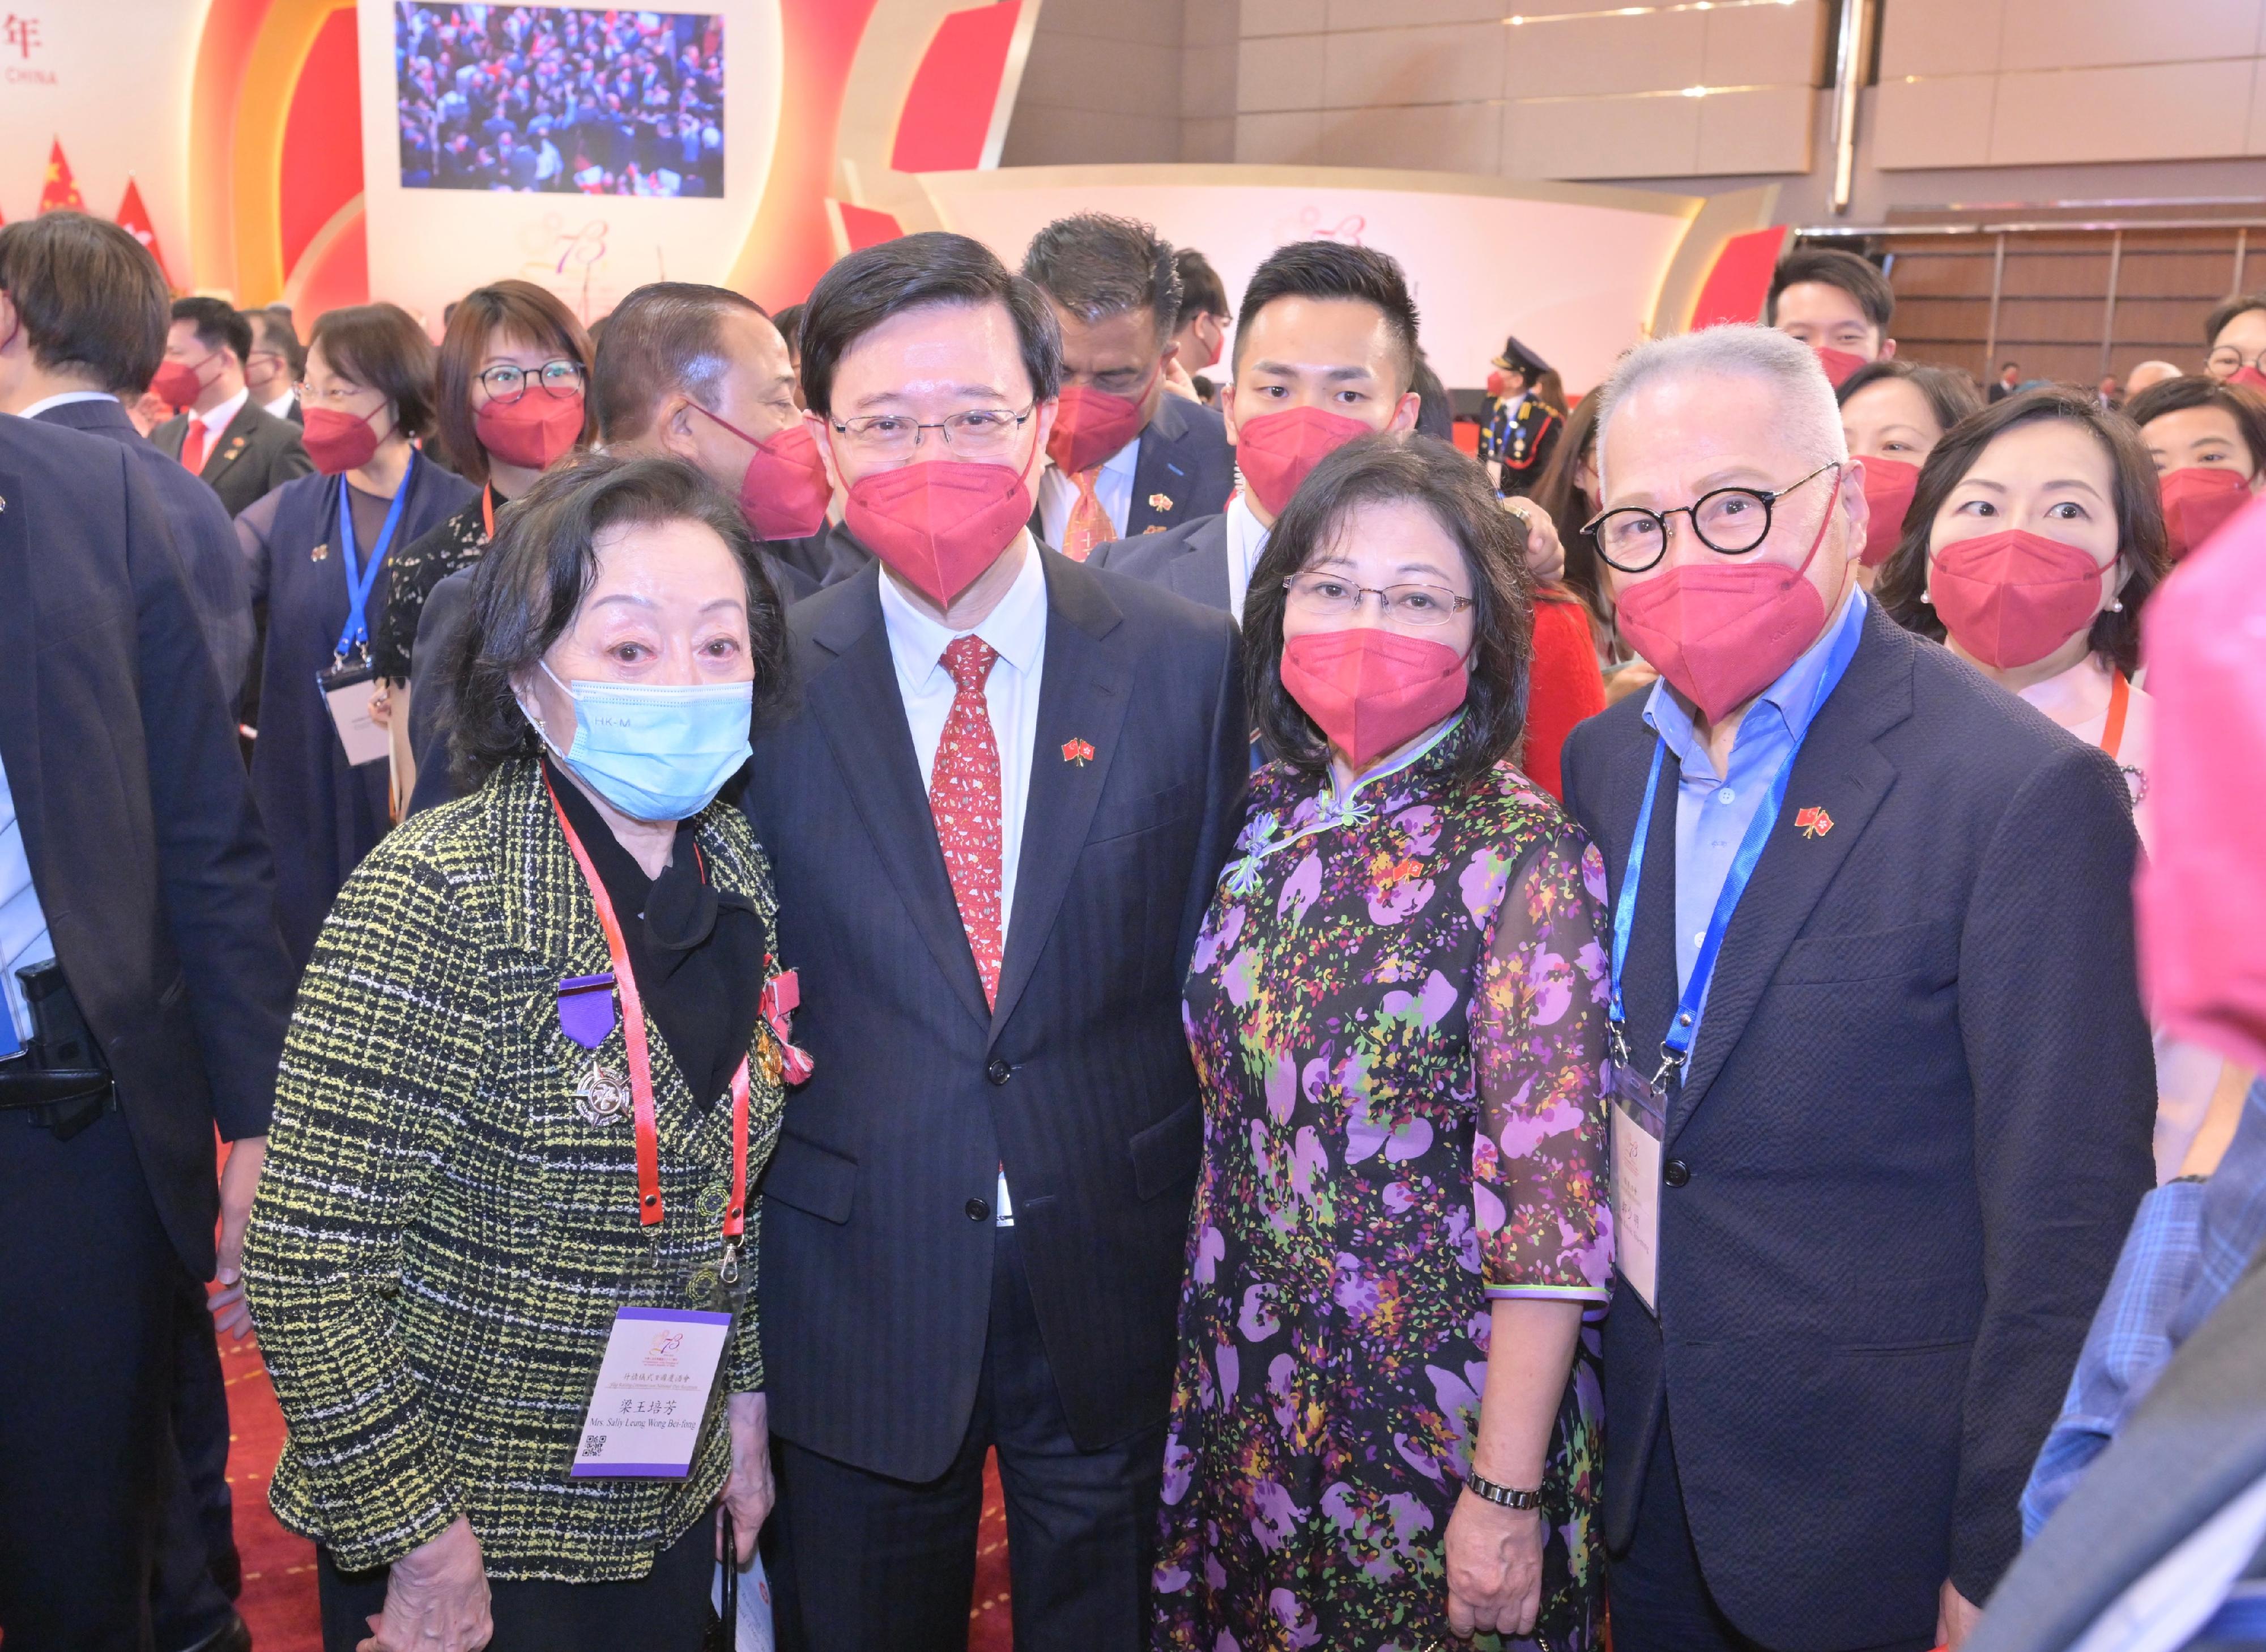 The Chief Executive, Mr John Lee (front, second left), and his wife Mrs Lee (front, second right), are pictured with guests at the reception in celebration of the 73rd anniversary of the founding of the People's Republic of China at the Hong Kong Convention and Exhibition Centre this morning (October 1).